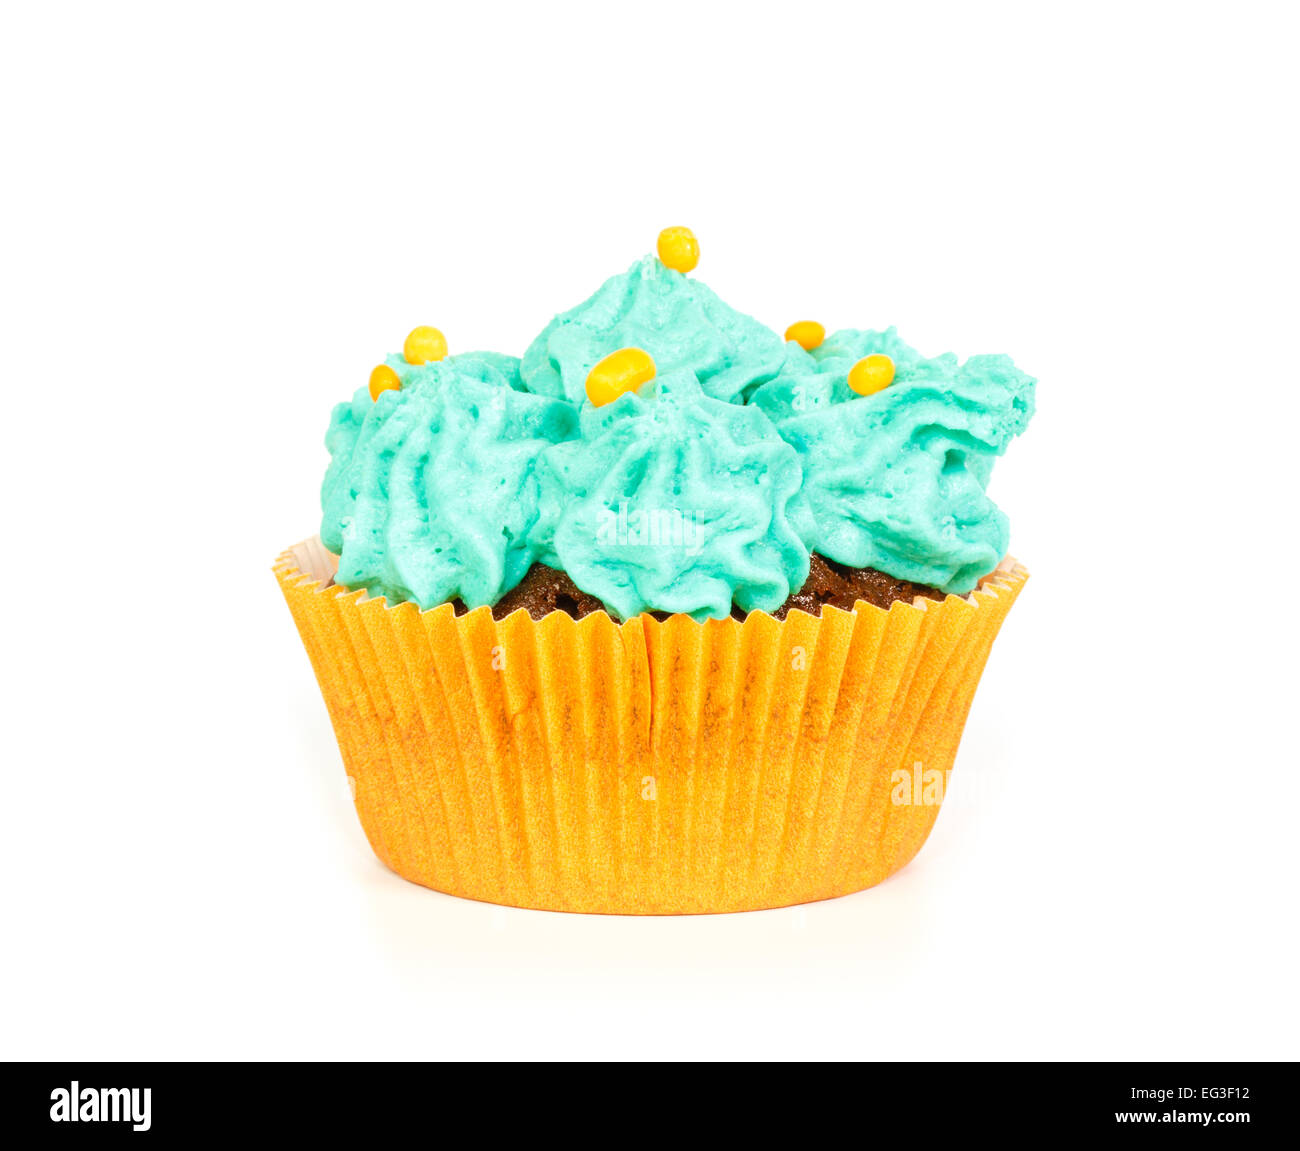 Cupcake with blue rosettes of cream frosting against white background Stock Photo